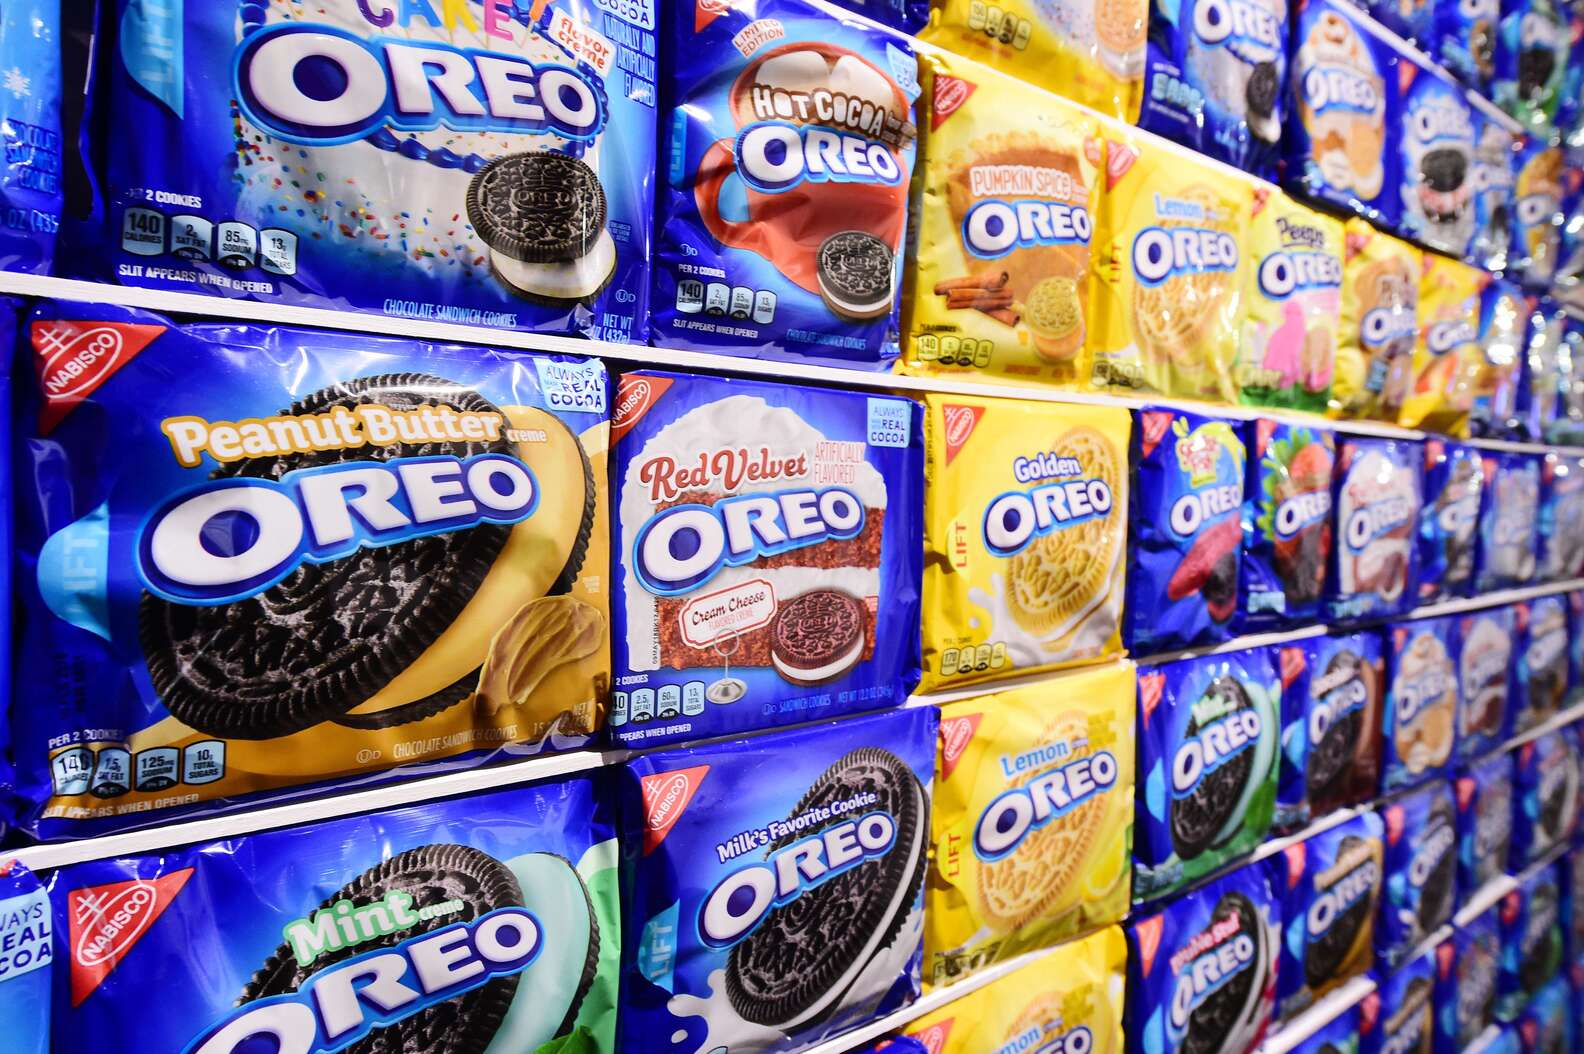 Best Oreo Flavors Every Oreo Cookie Flavor, Ranked From Worst to Best